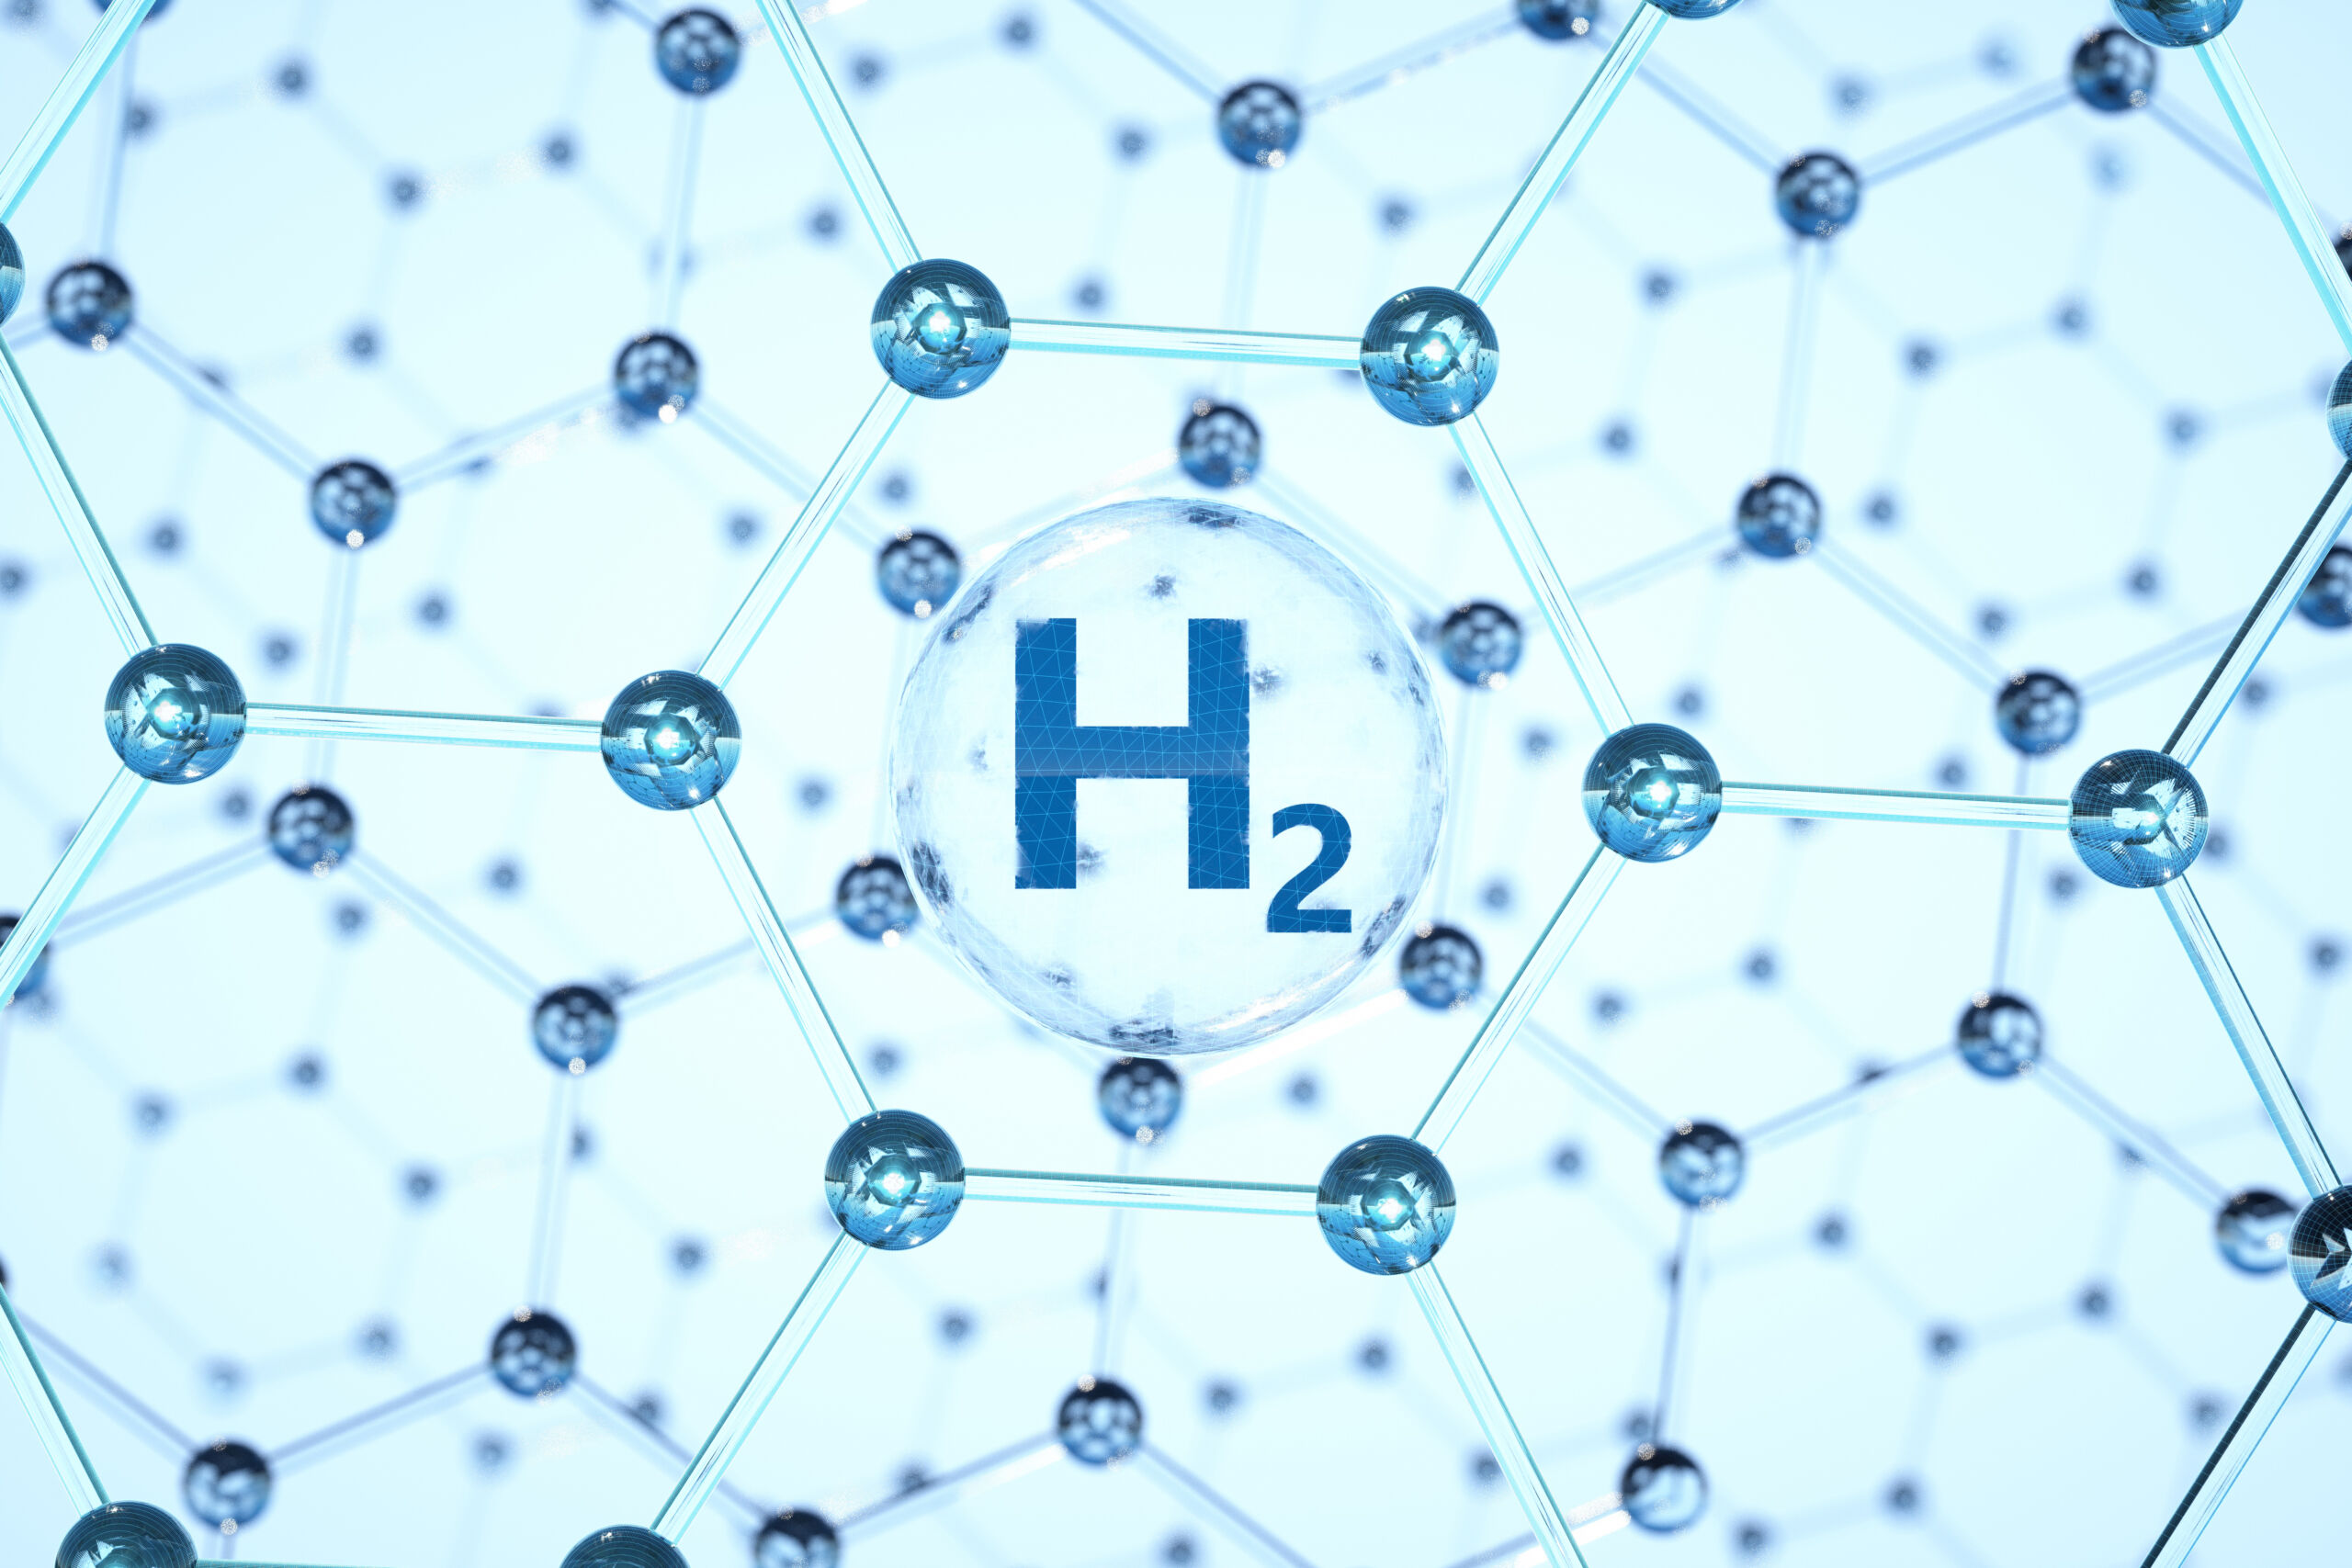 New device can make hydrogen when dunked in salt water | Ars Technica